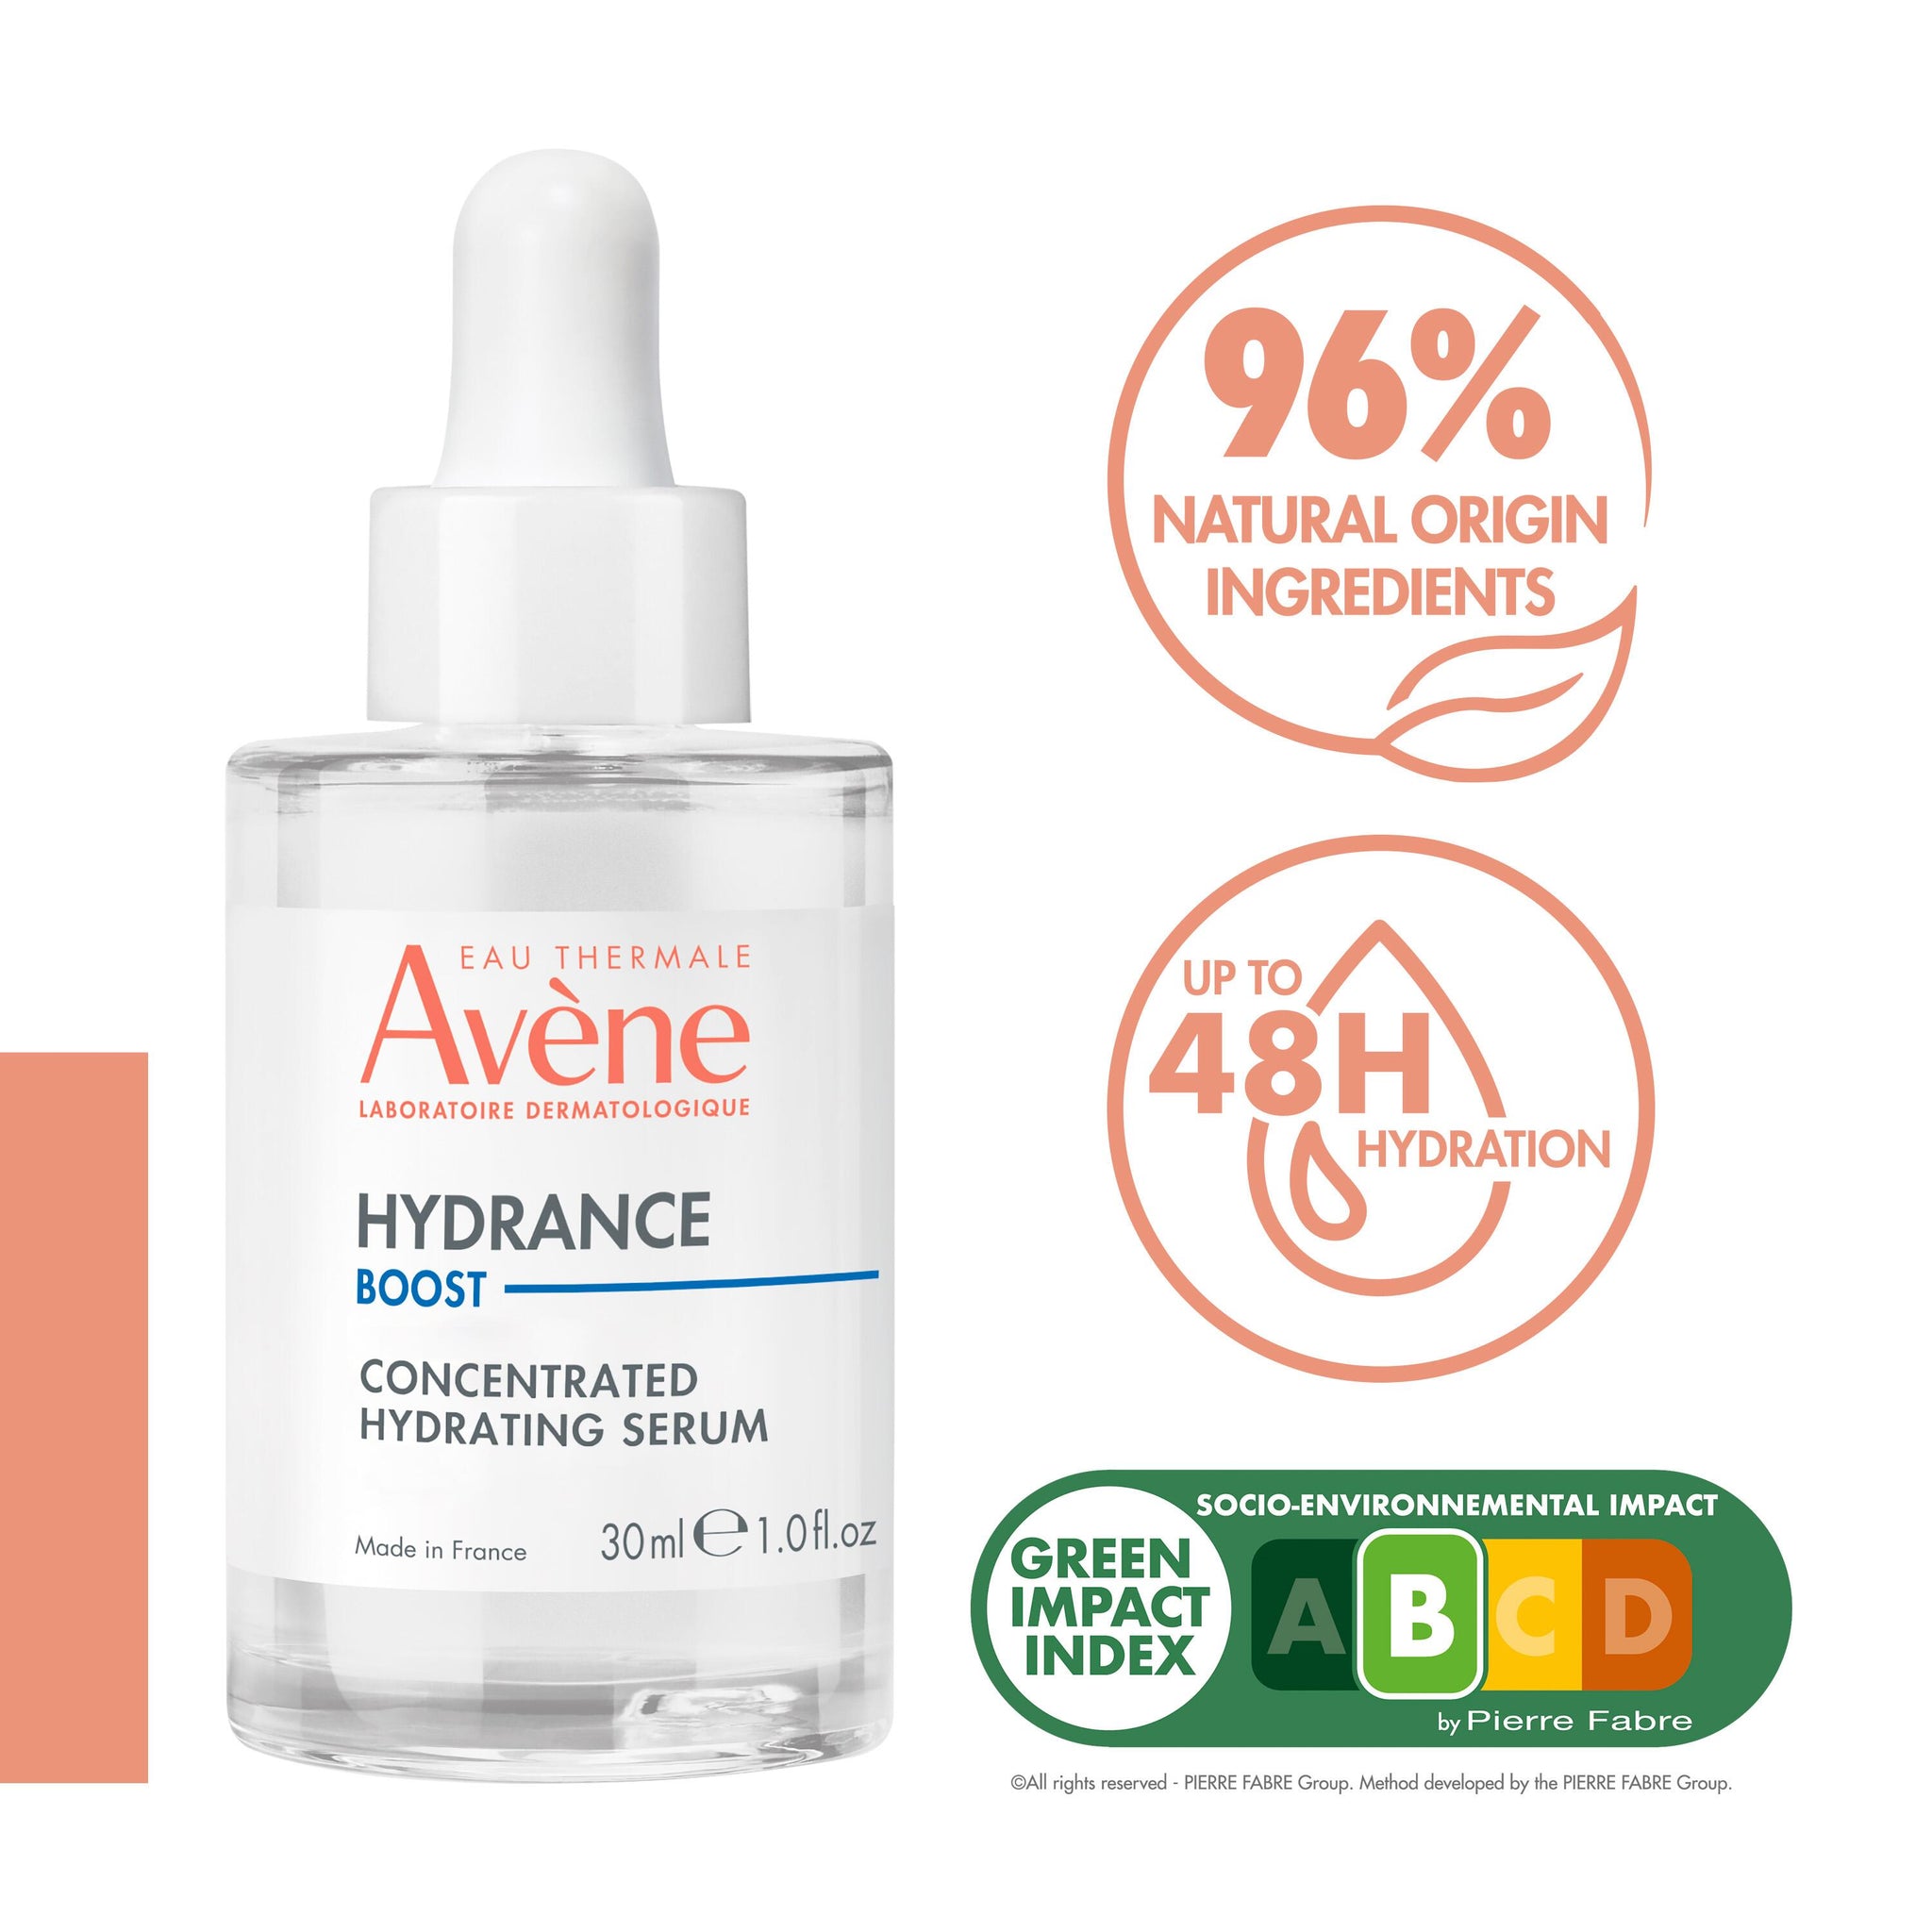 Avene Hydrance Optimale Hydrating Serum (For Dehydrated Sensitive Skin) a  Argentina. CosmoStore Argentina